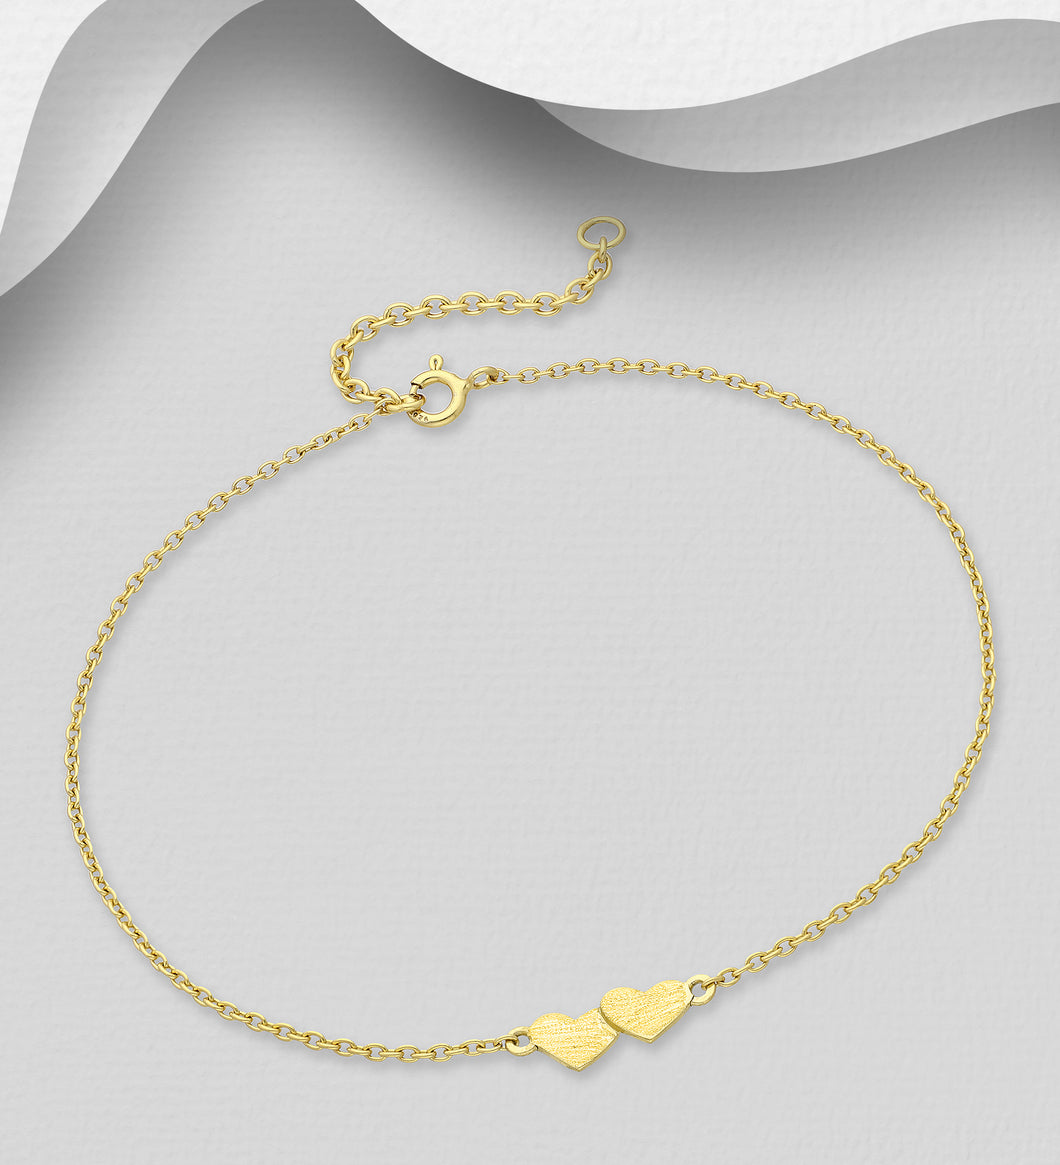 Sterling Silver Heart Bracelet, Heart Plated with 1 Micron 14K or 18K Yellow Gold